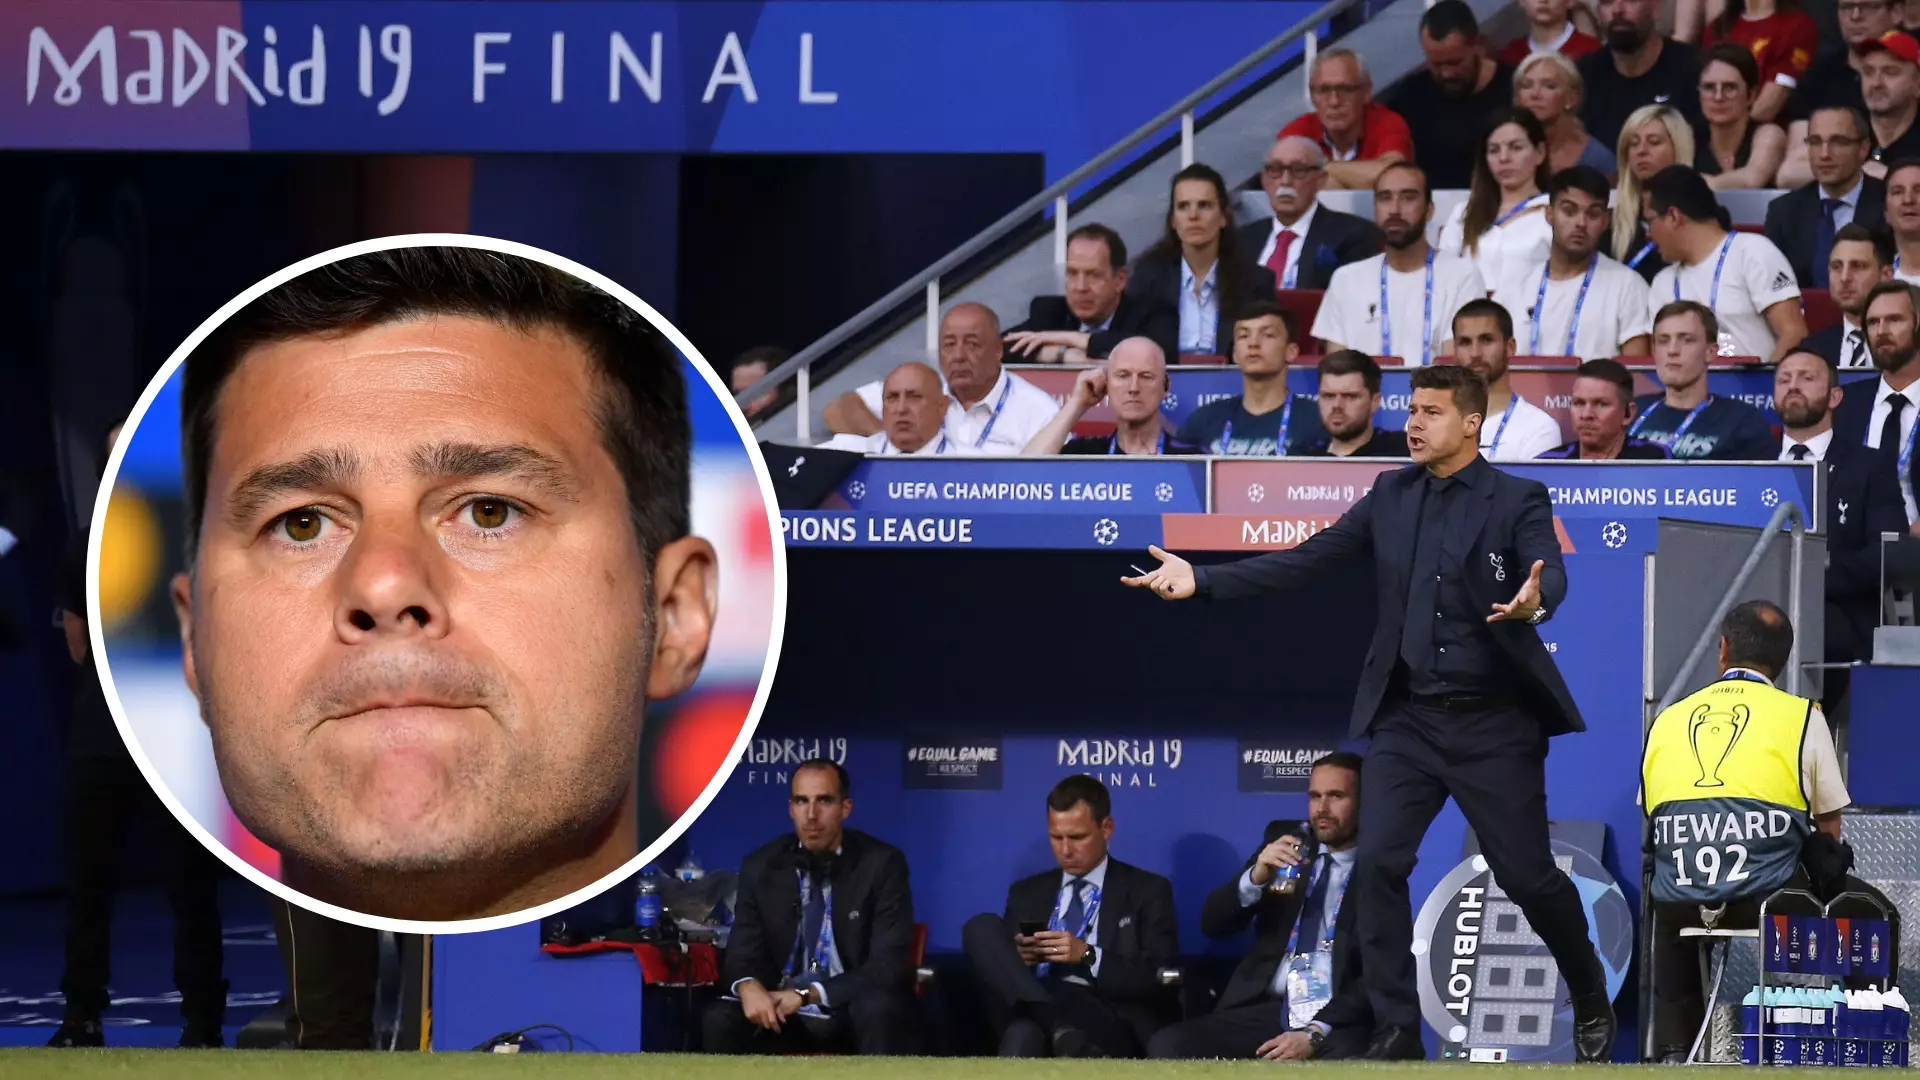 Heartbroken Mauricio Pochettino 'Spent 10 Days In His House' After Champions League Final Defeat